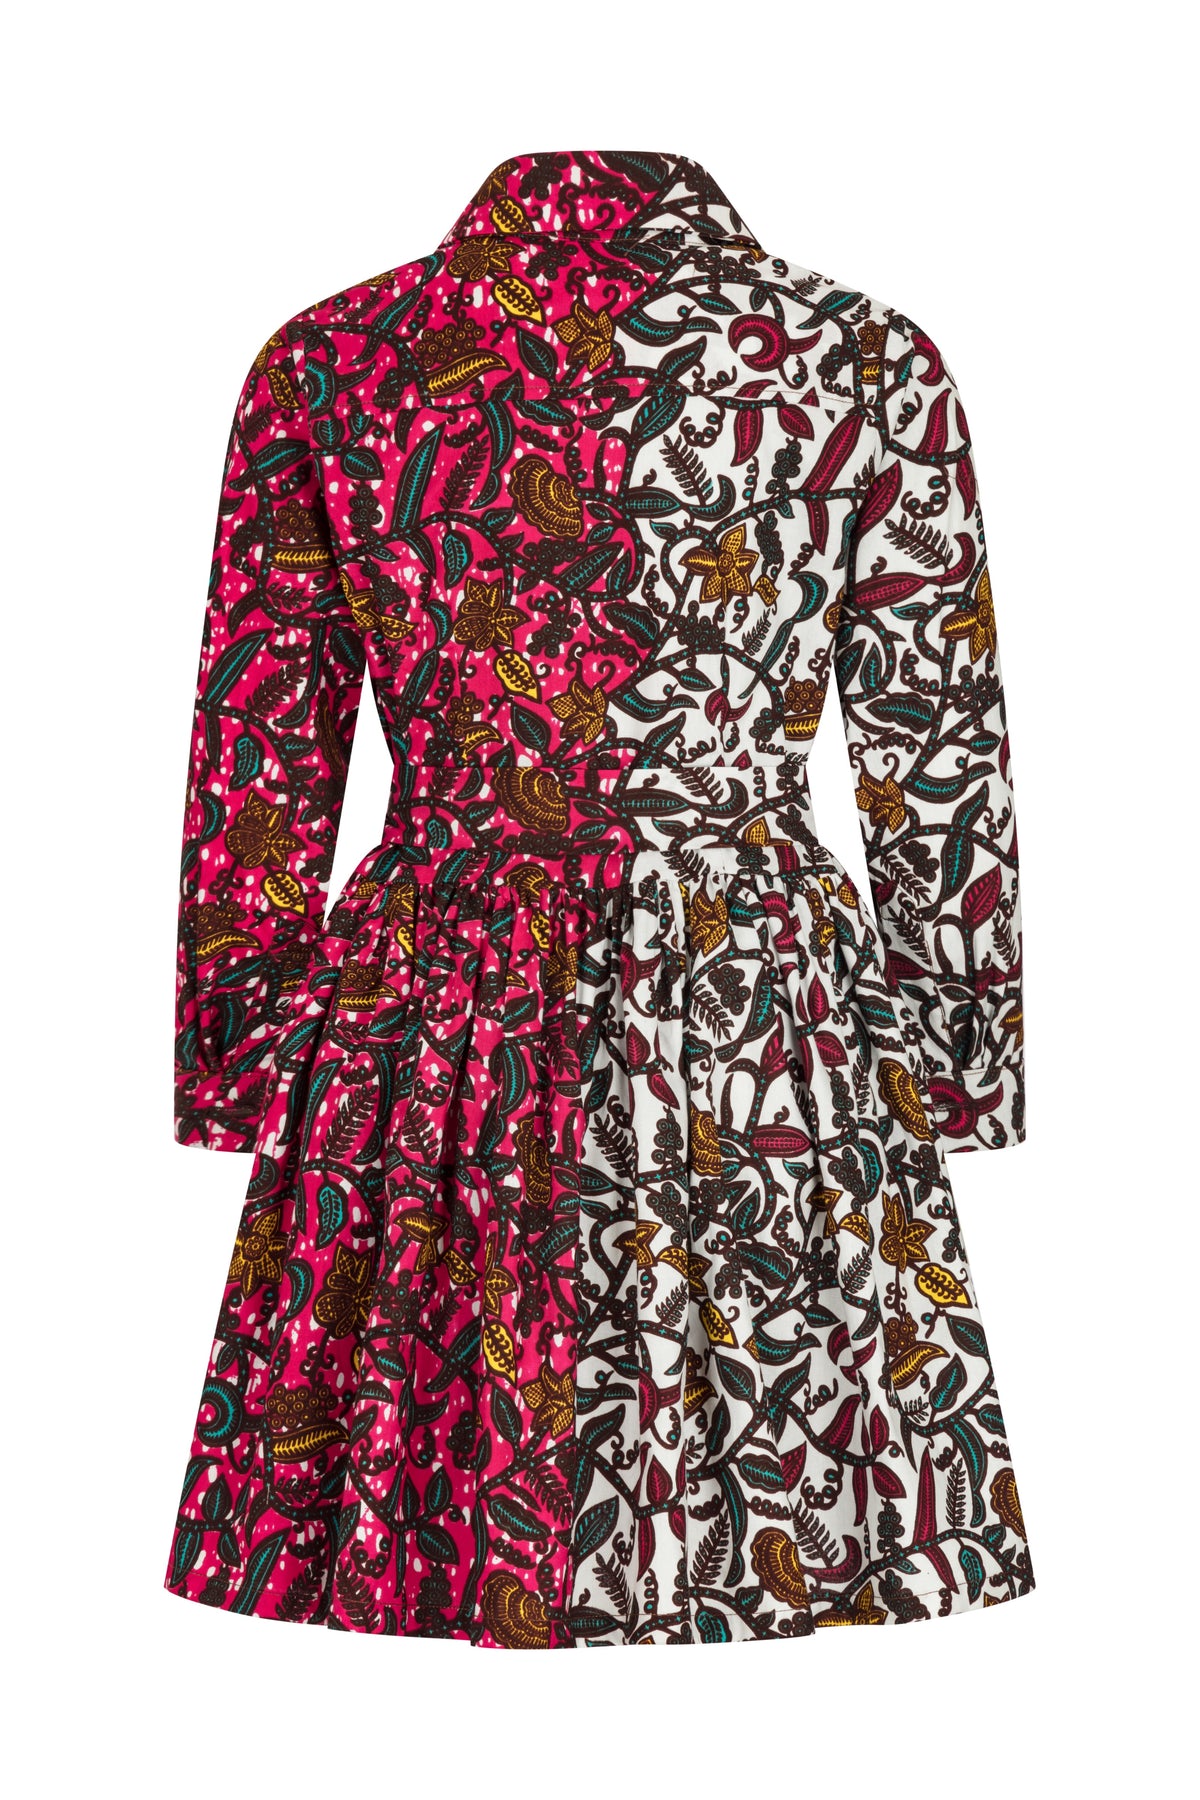 Girls Pink Floral African print dress - OHEMA OHENE AFRICAN INSPIRED FASHION